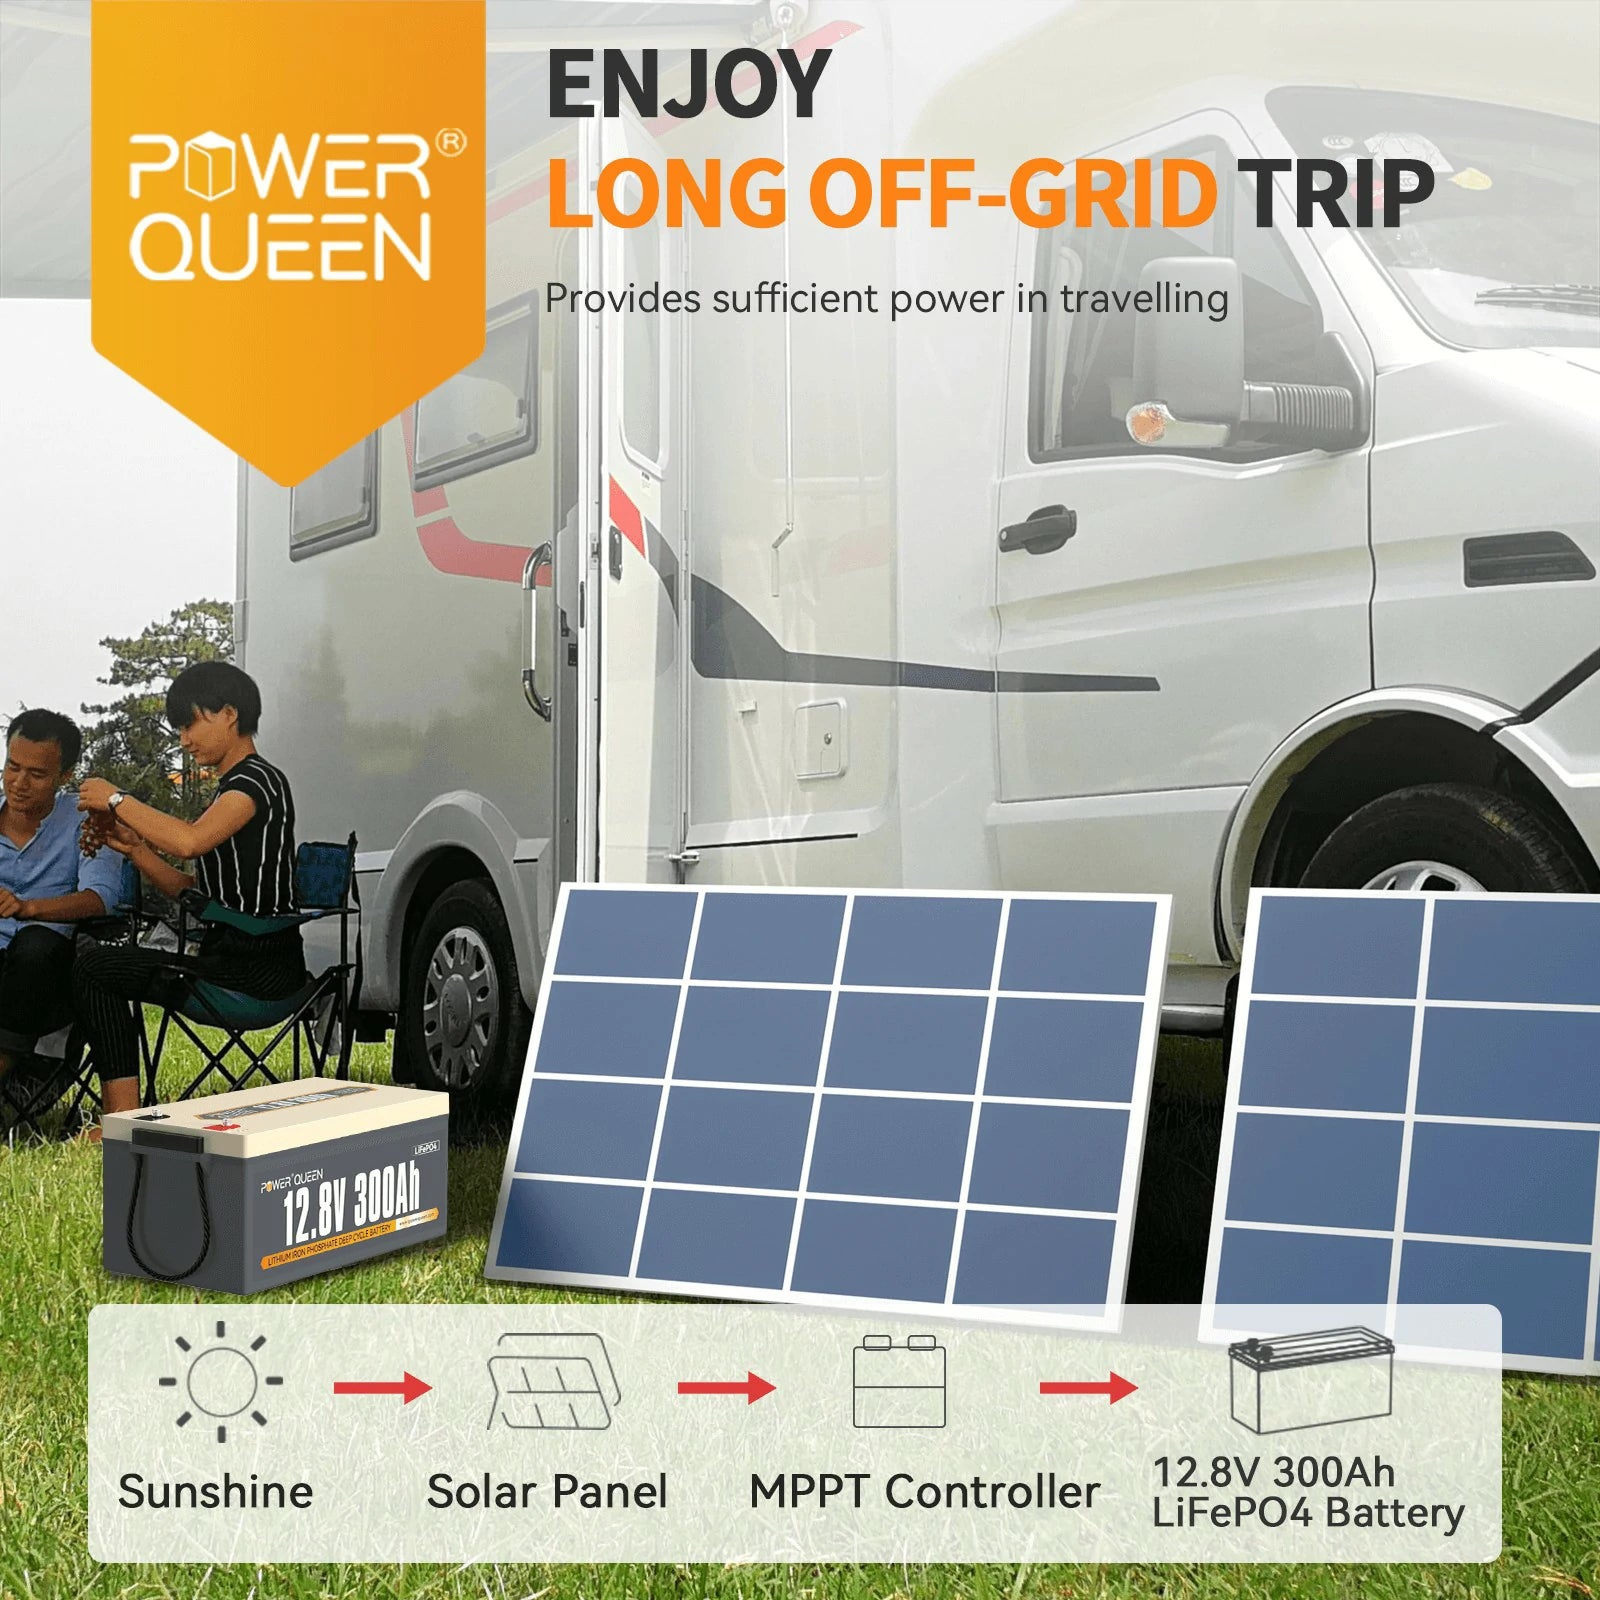 Power-Queen-12V-300Ah-LiFePO4-Battery-design-for-long-off-grid-trip